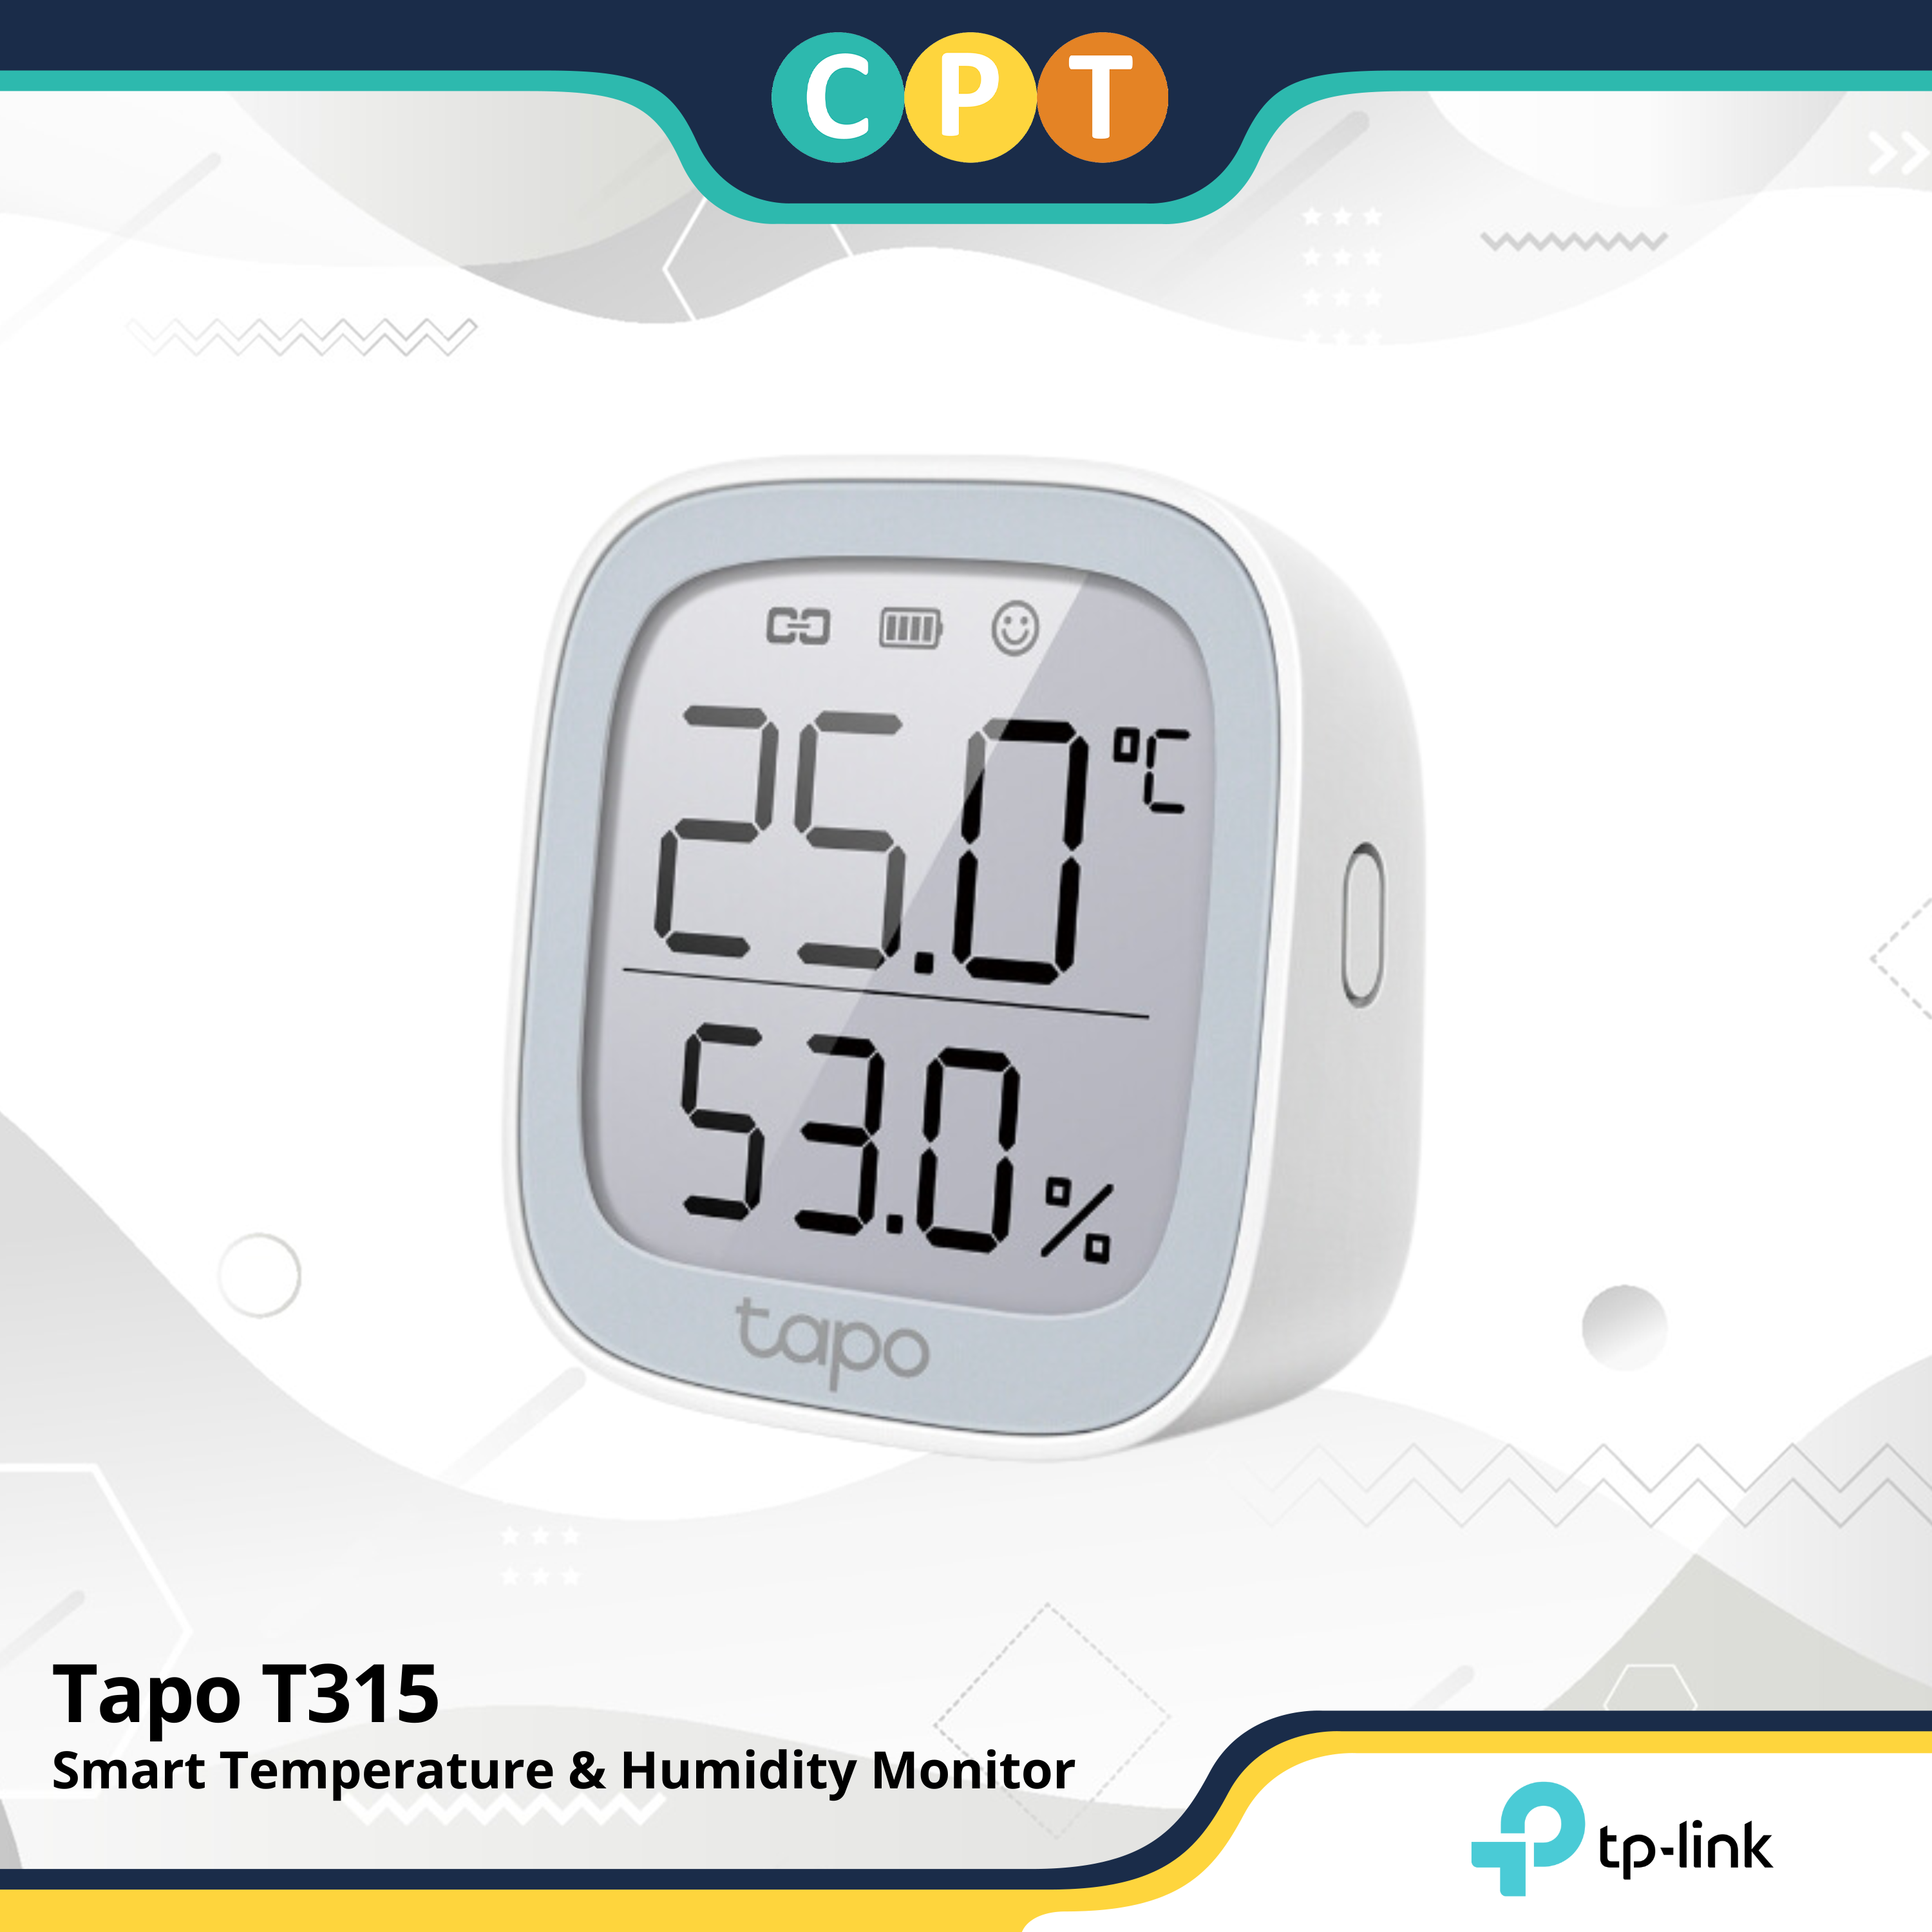 TP-LINK TAPO T315, Smart temperature and humidity monitor requires